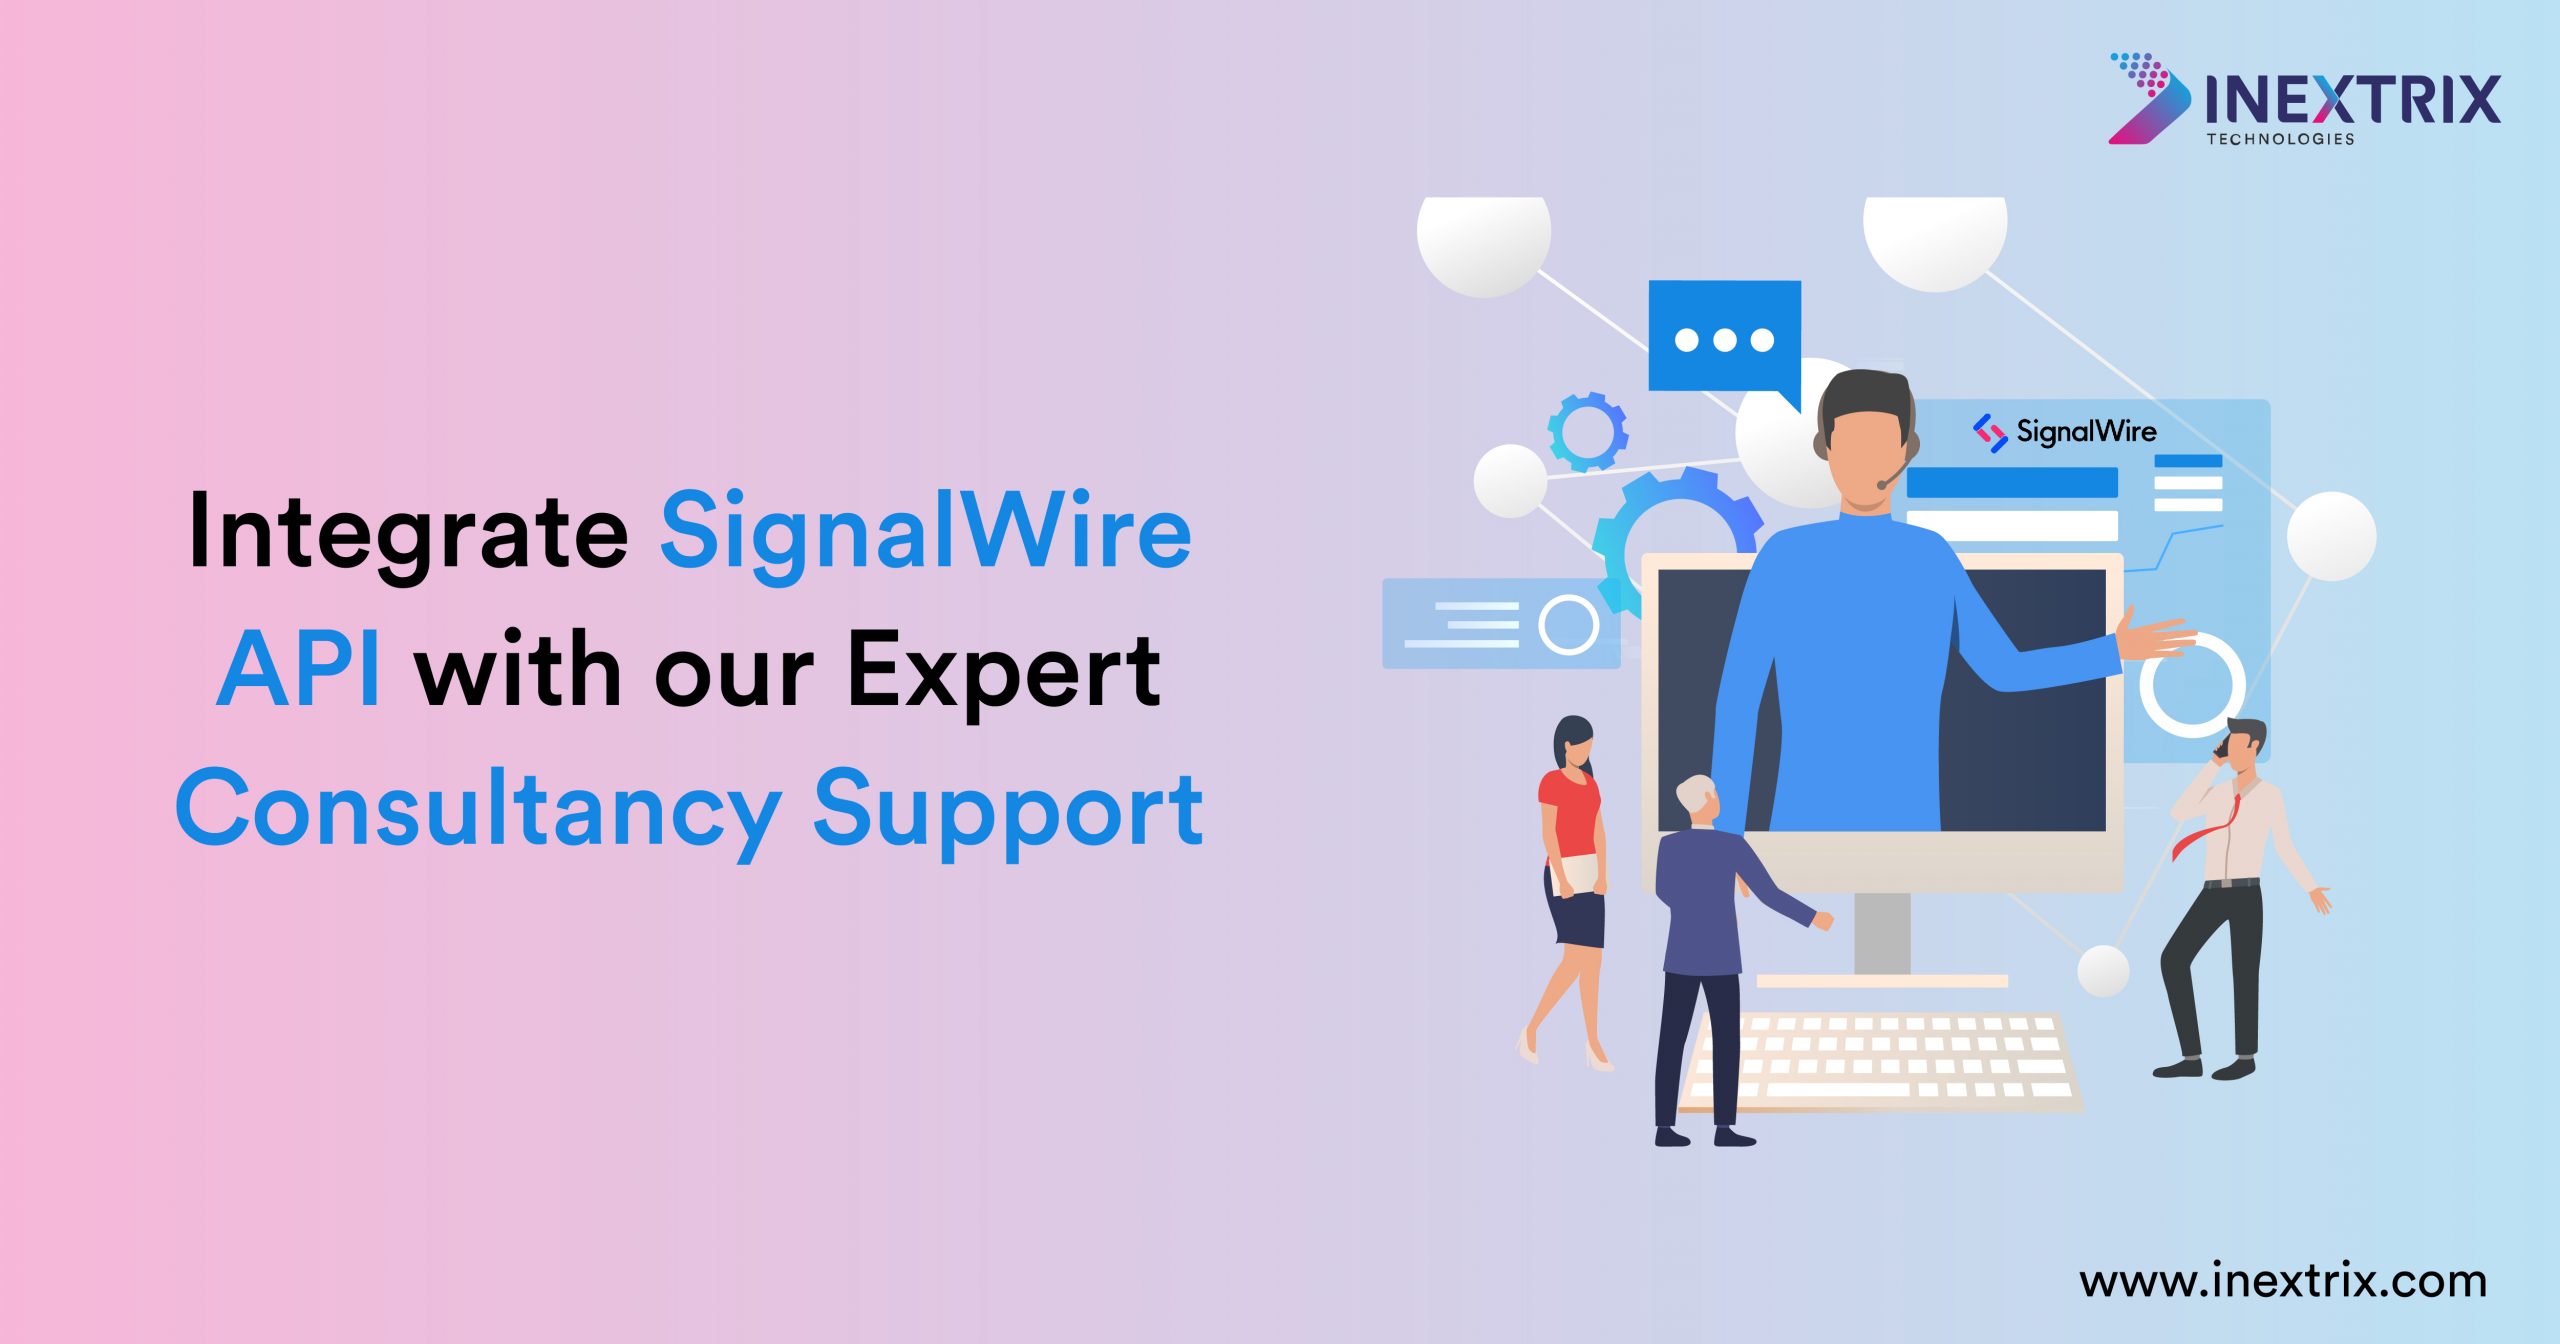 Integrate SignalWire API with our Expert Consultancy Support